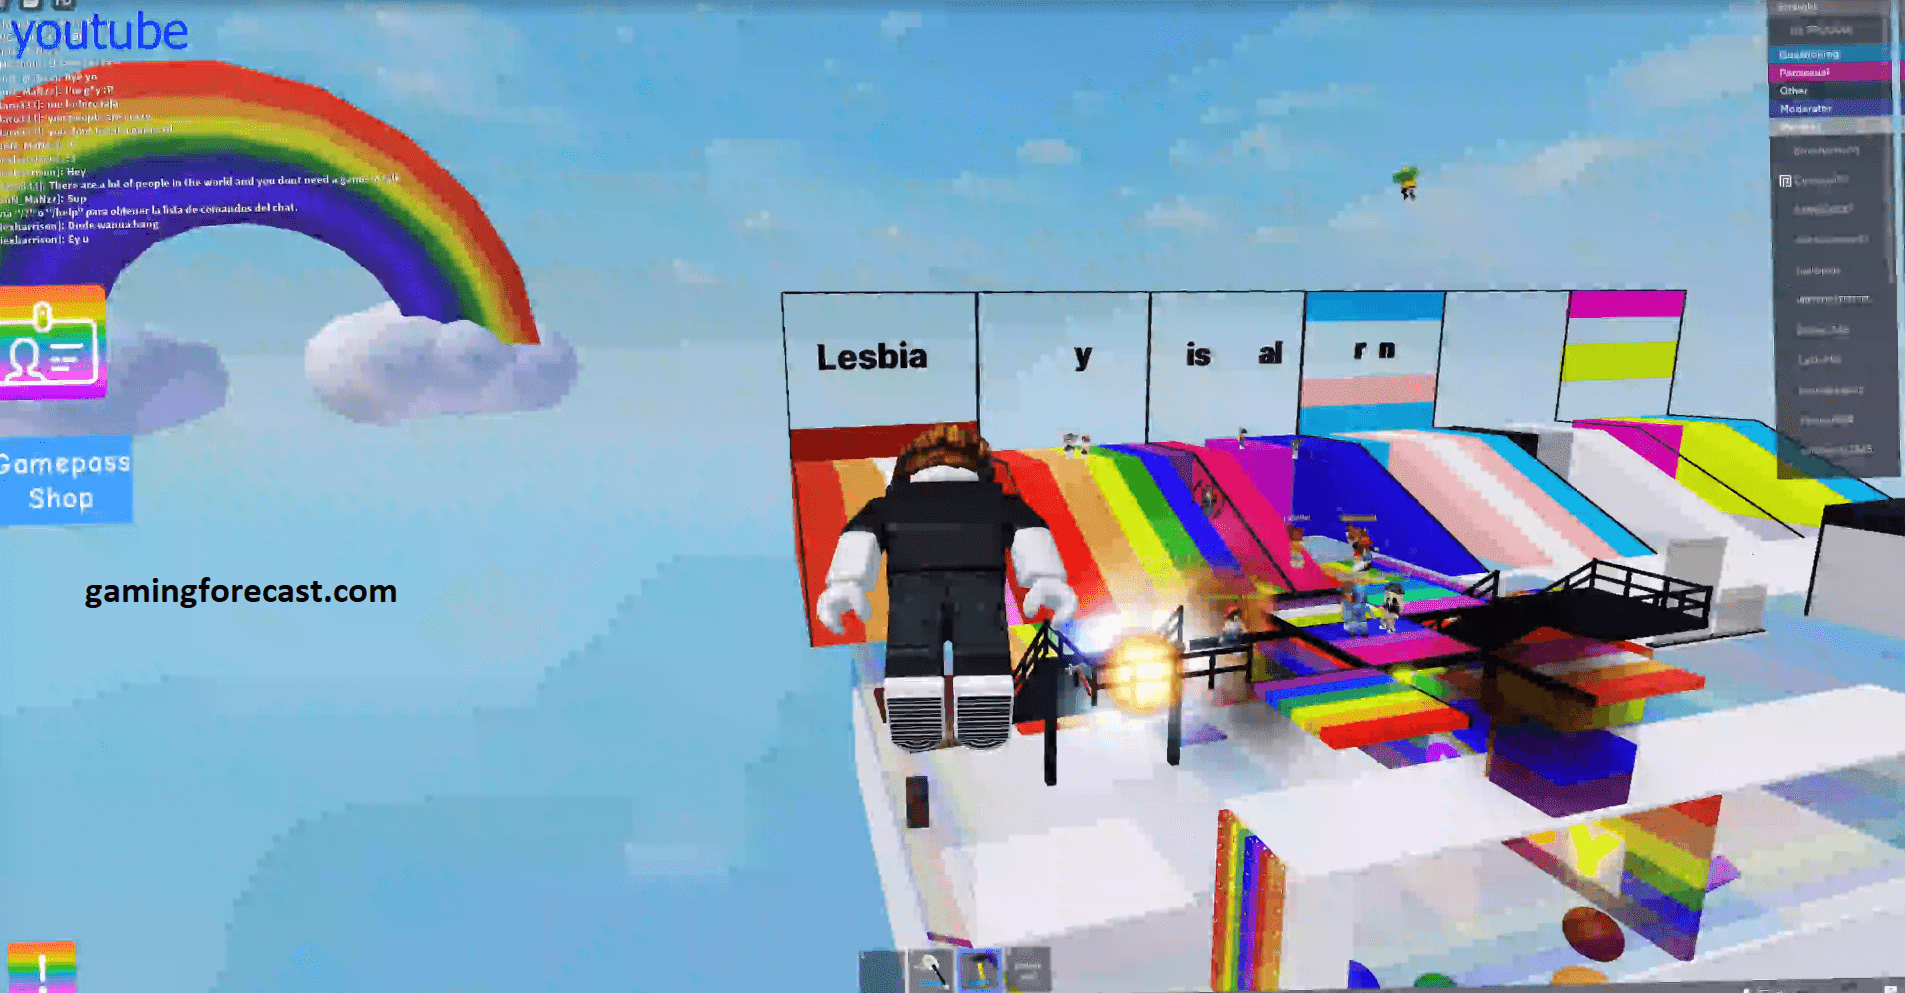 Roblox Hack Download Pc Destroy Lobby Fly Aimbot Scripts 2021 Gaming Forecast Download Free Online Game Hacks - roblox jailbreak exploit download 2021